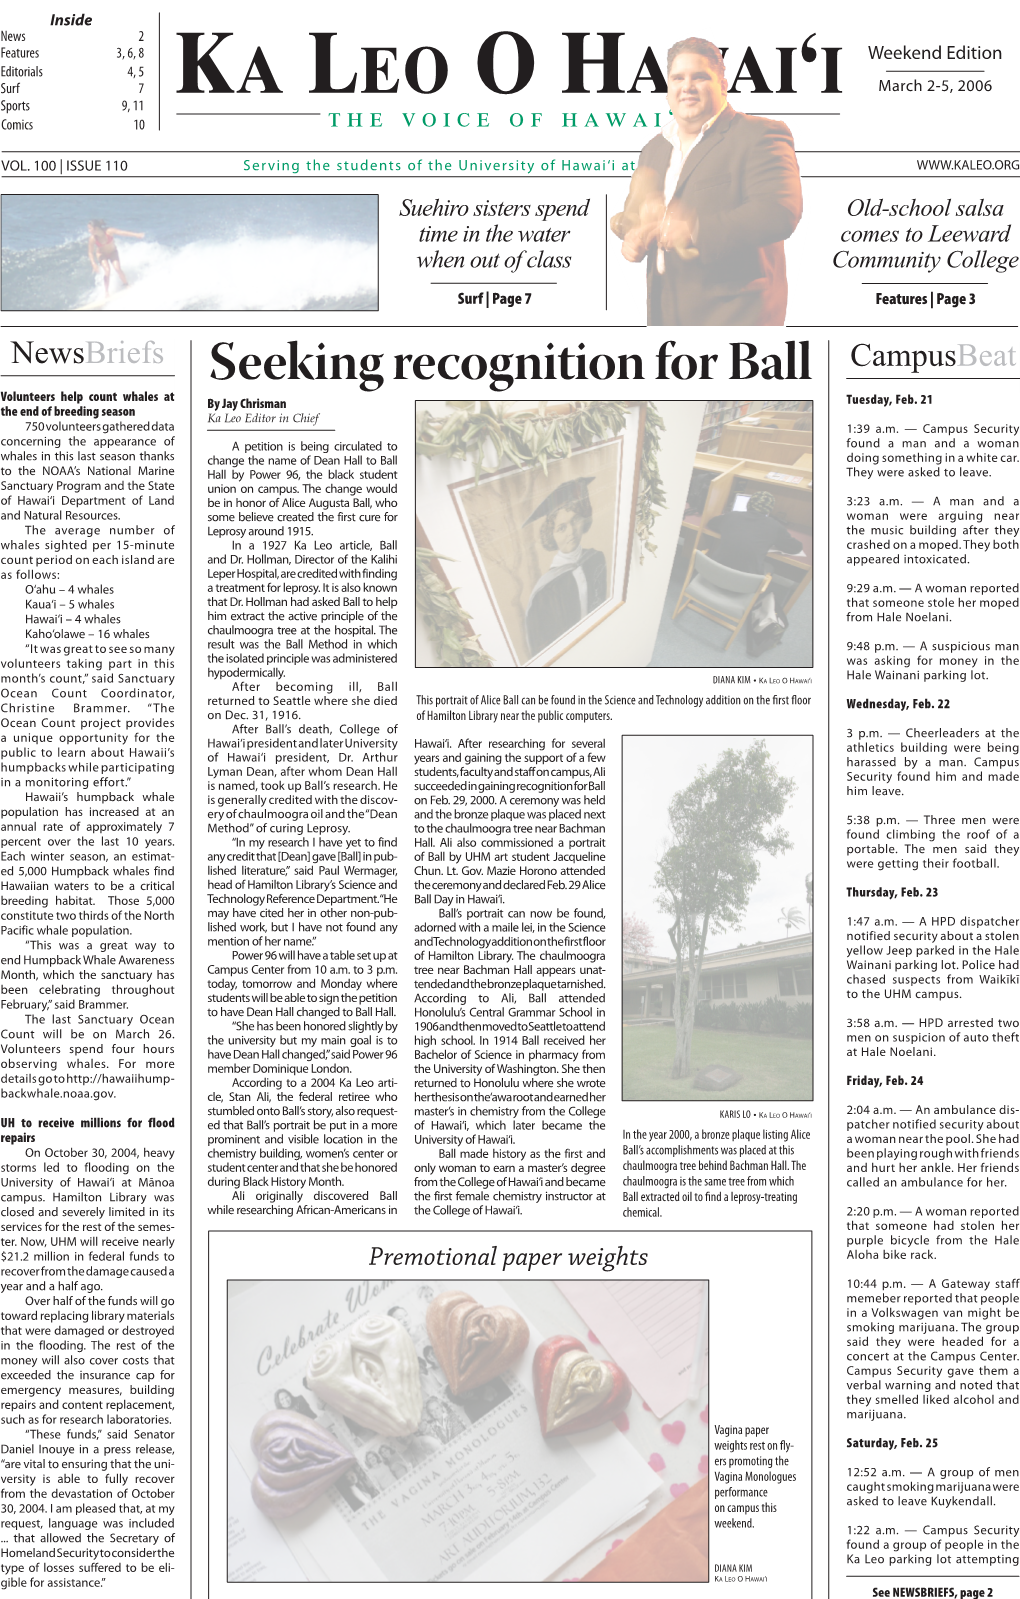 Seeking Recognition for Ball Tuesday, Feb